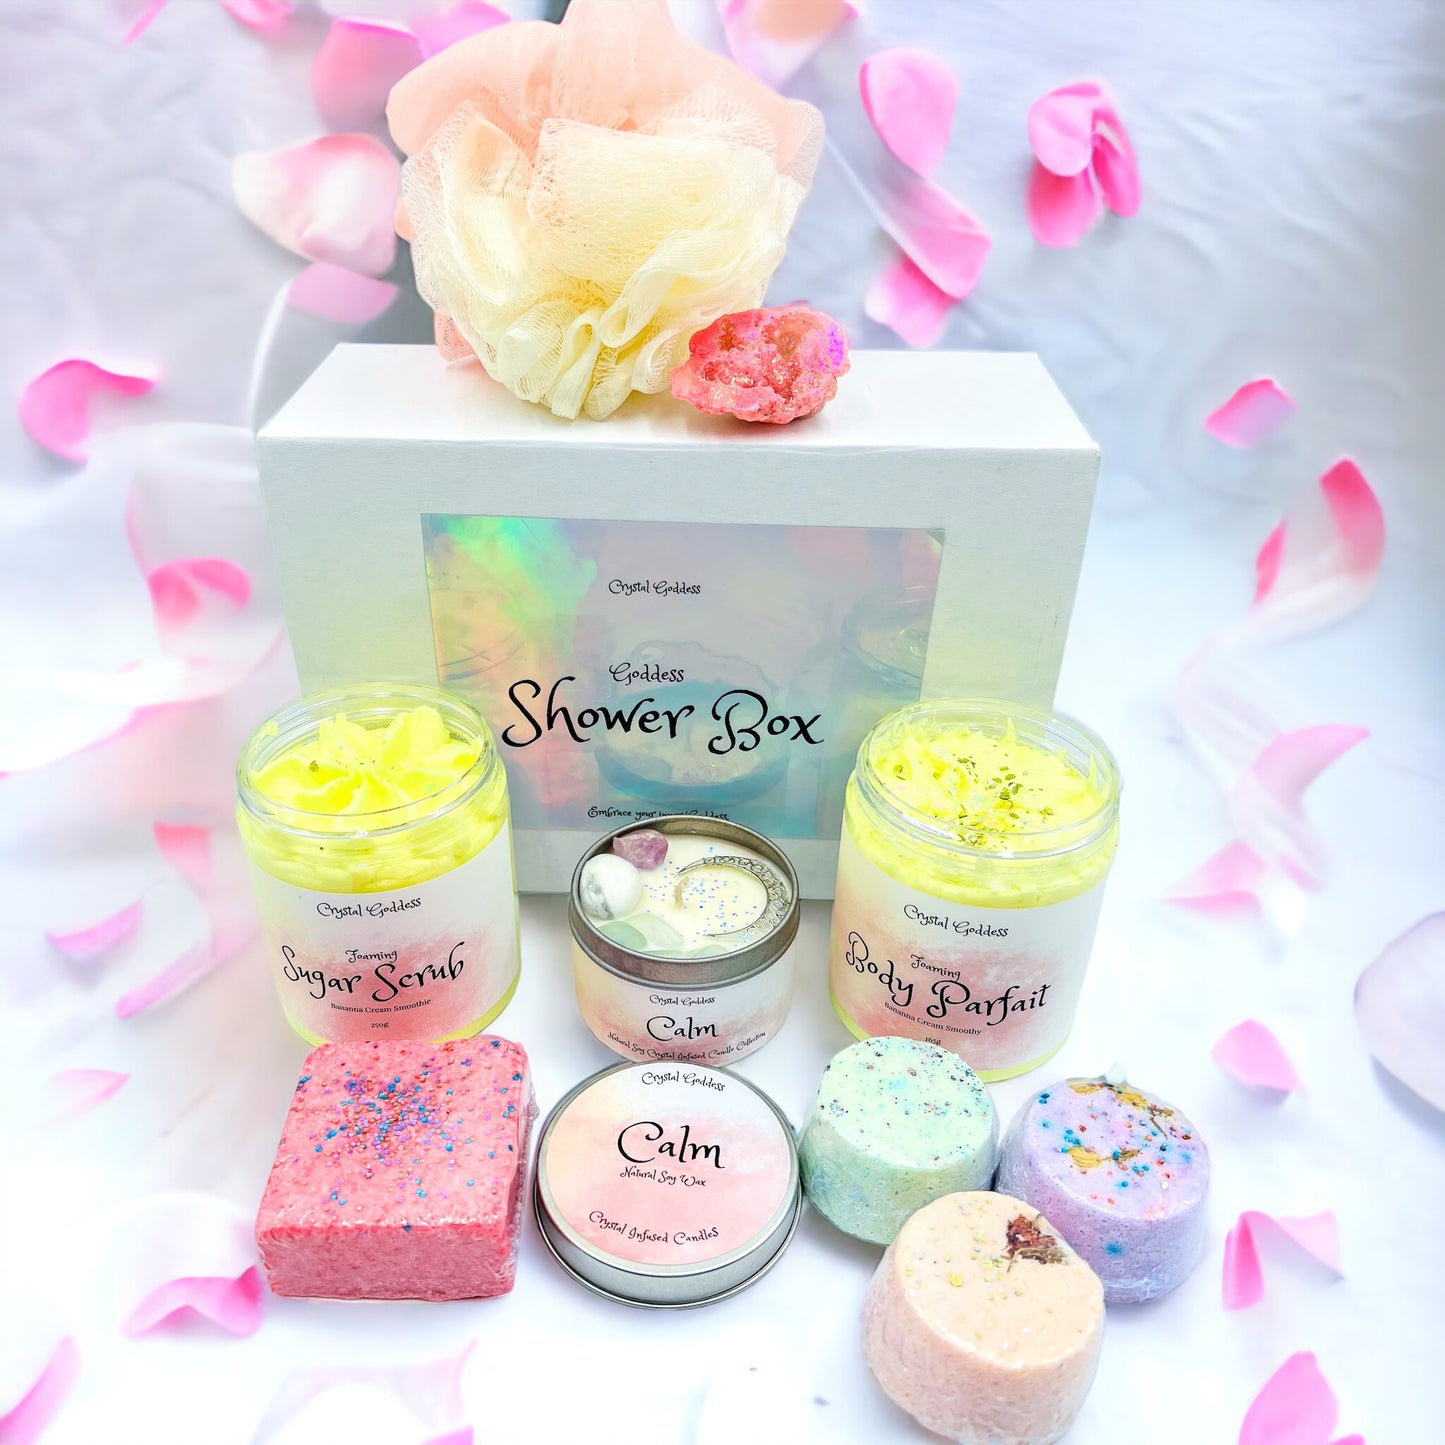 Shower Gift Box With Calm Affirmation Candle